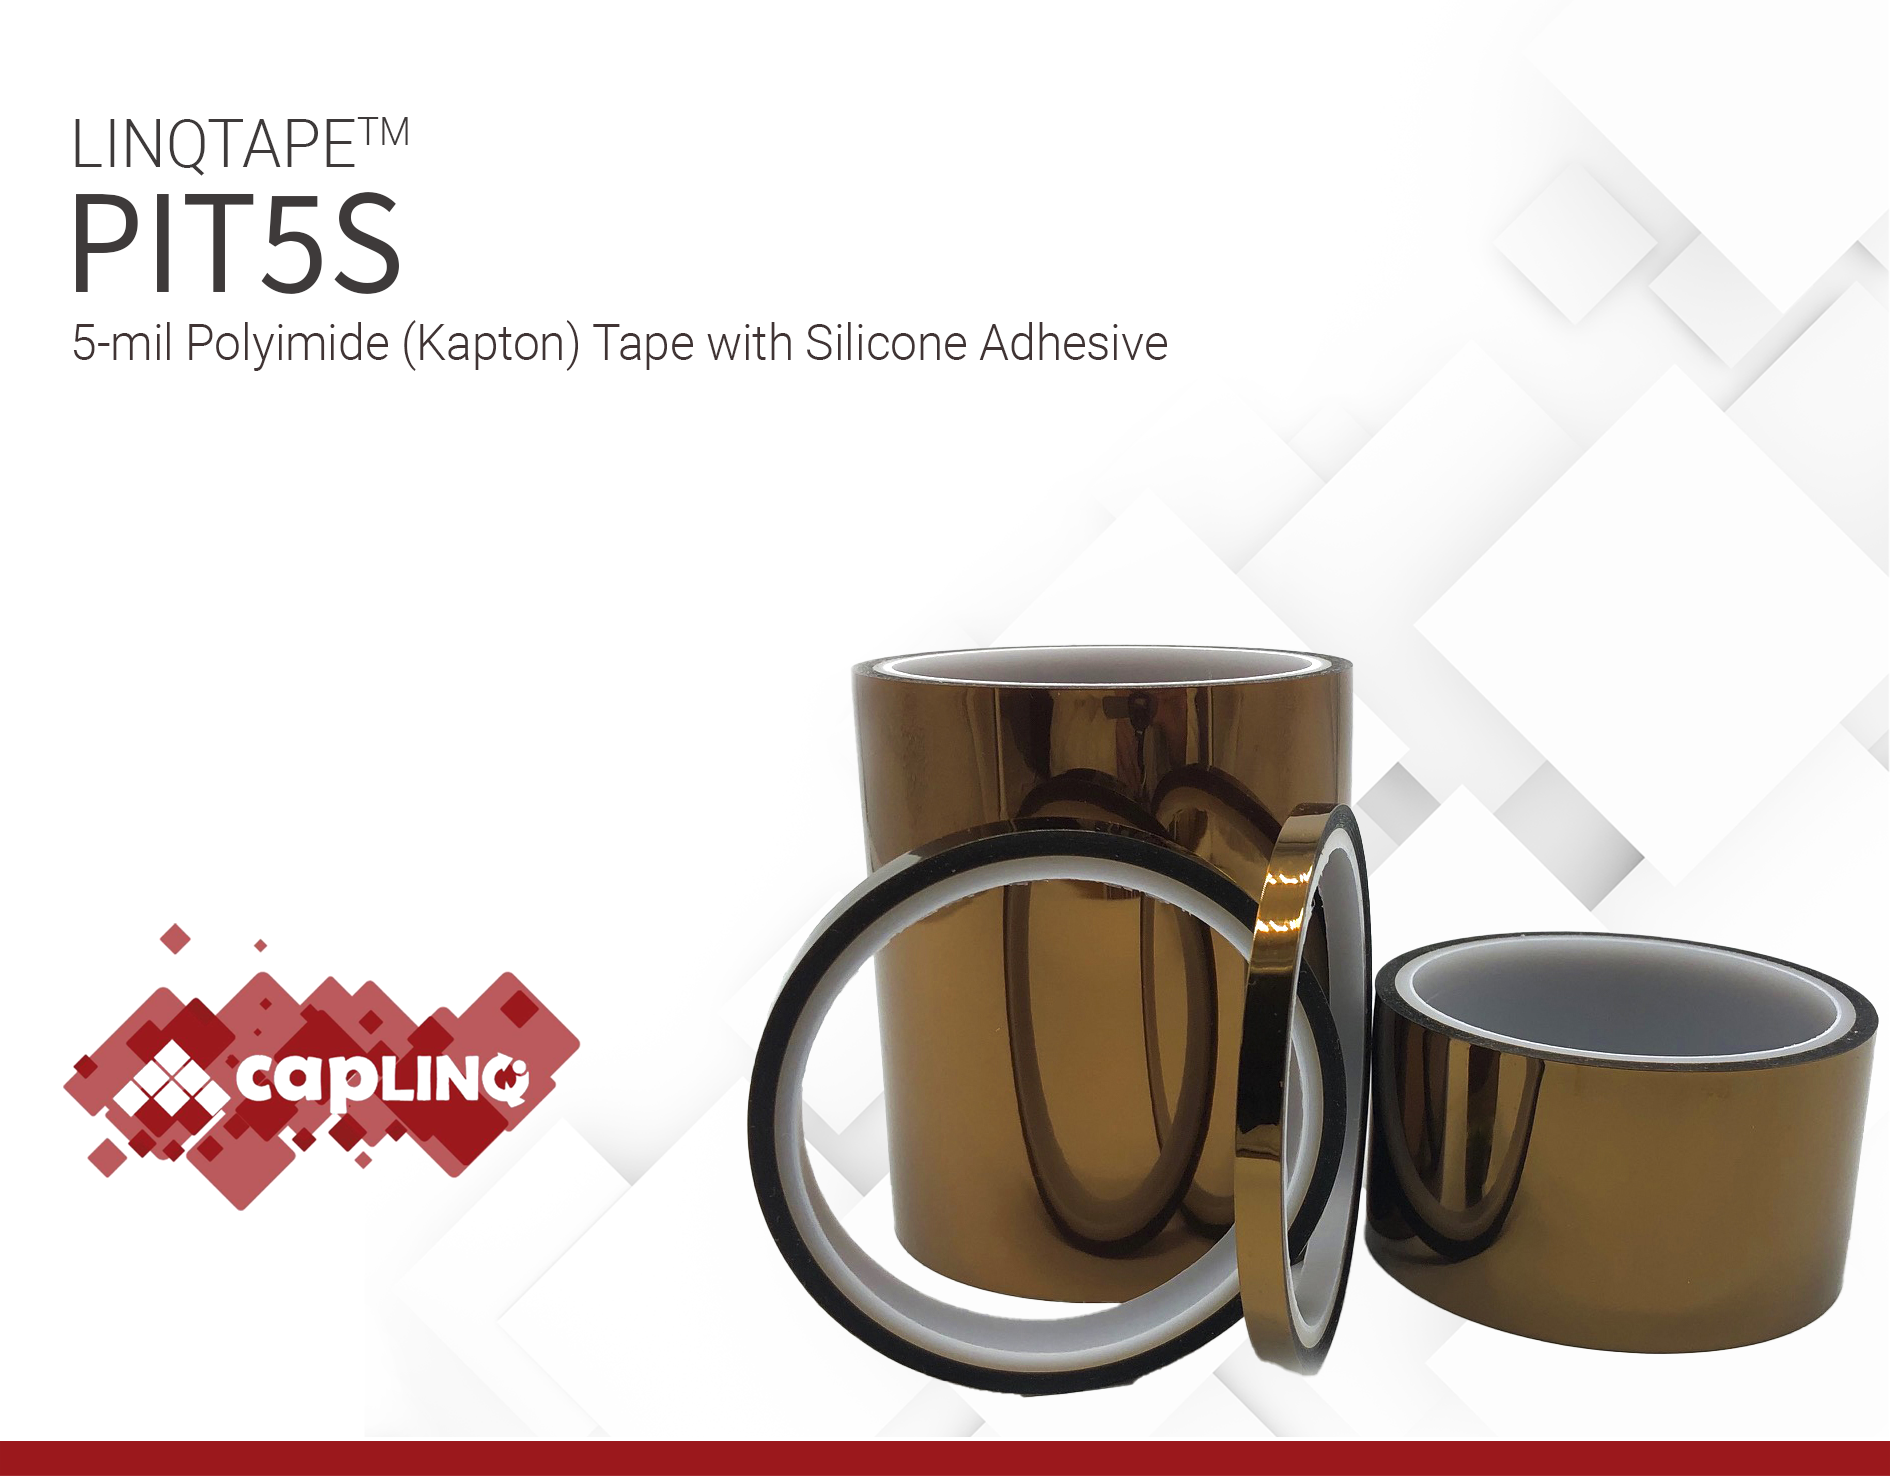 https://www.caplinq.com/components/com_virtuemart/shop_image/product/PIT5S--5-mil-Polyimide-Kapton-Tape-with-Silicone-Adhesive-6.png